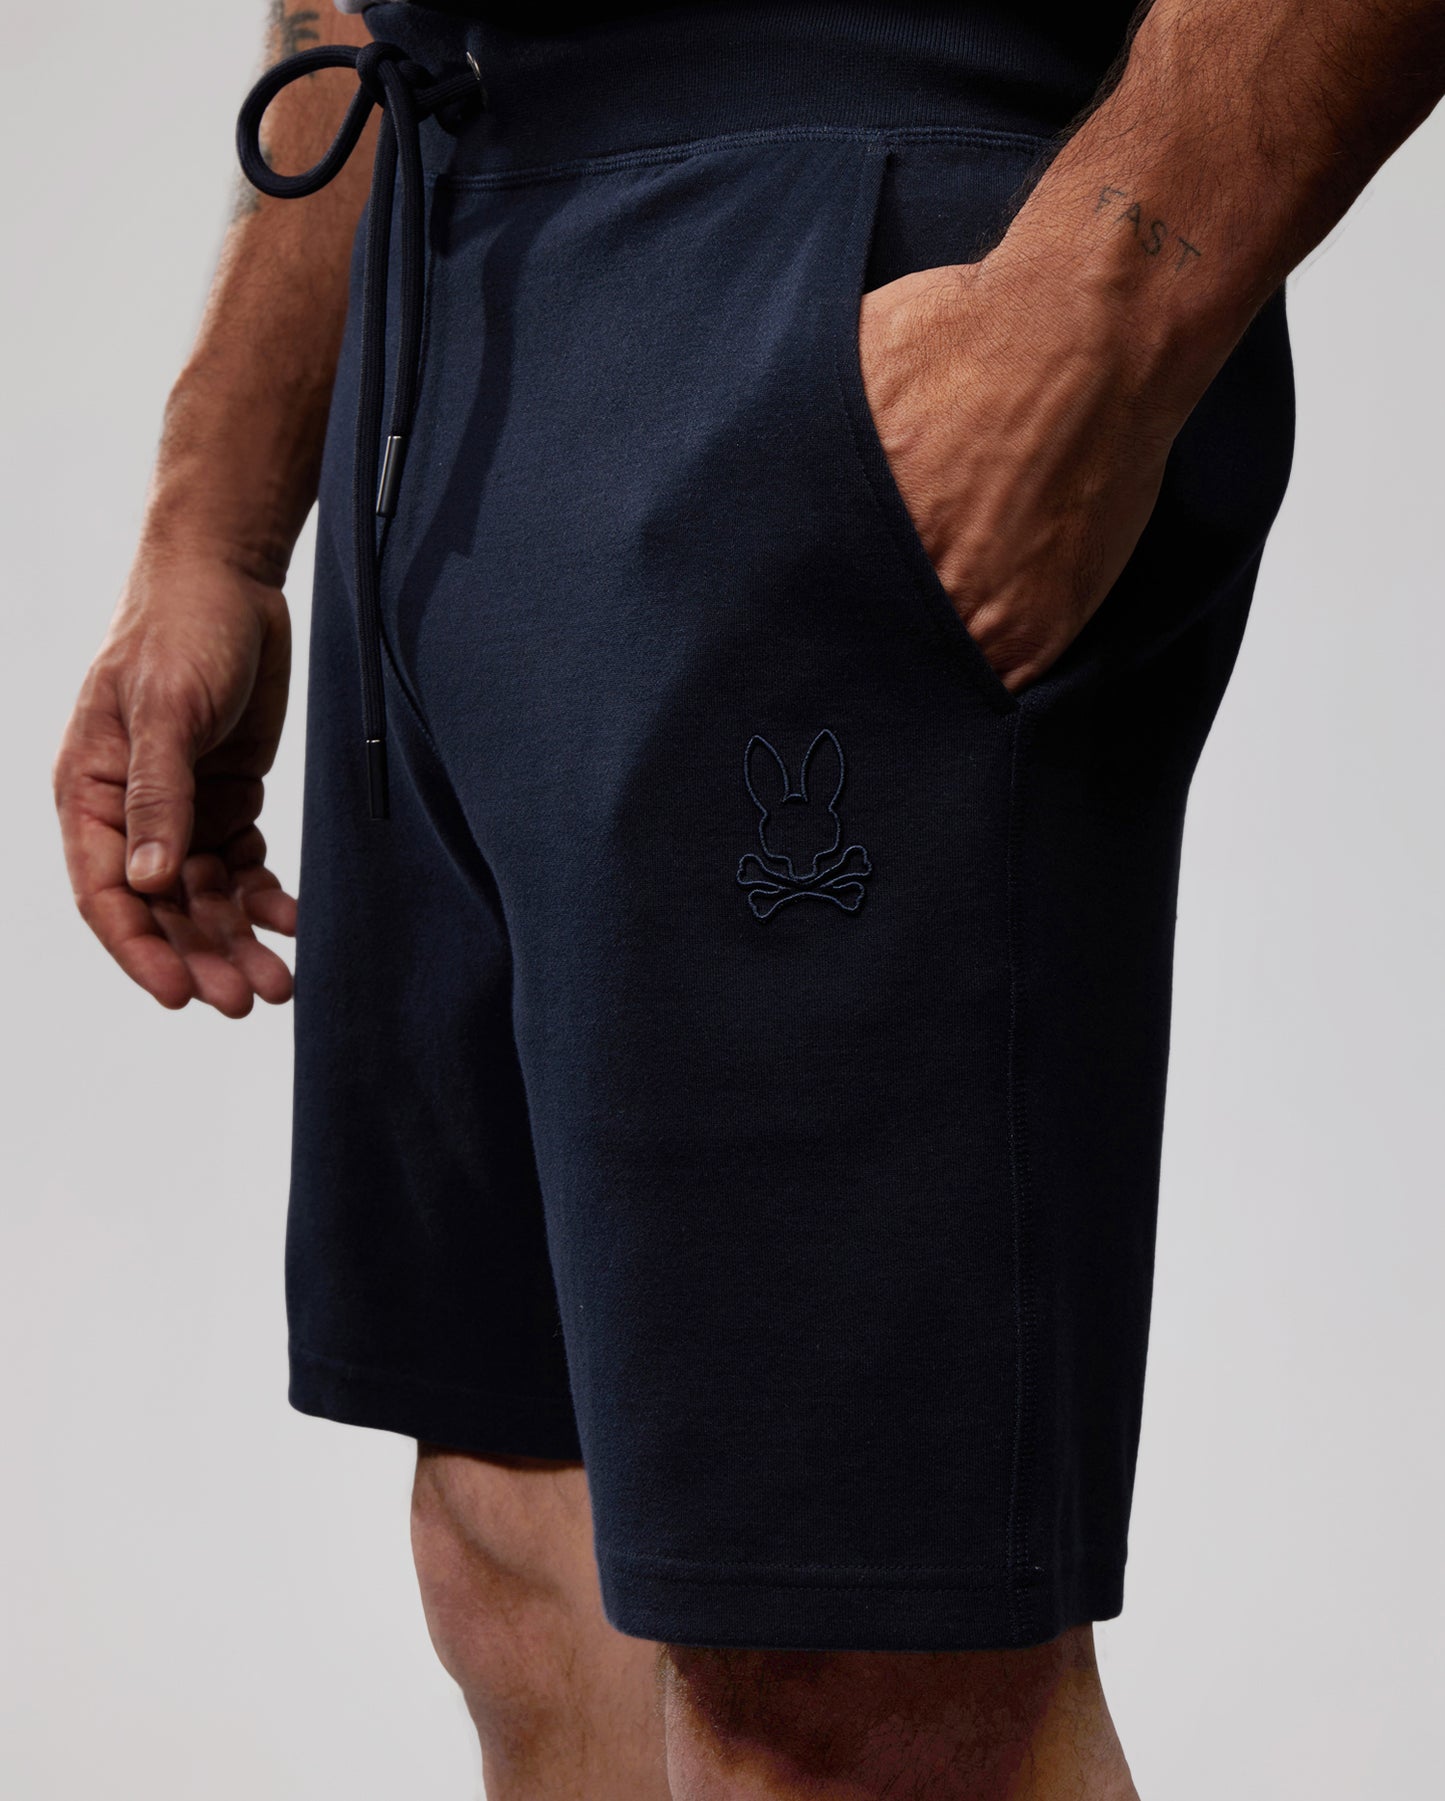 Psycho Bunny Sweat Shorts - Hindes - M / Seaport Blue / B6R416T1FT